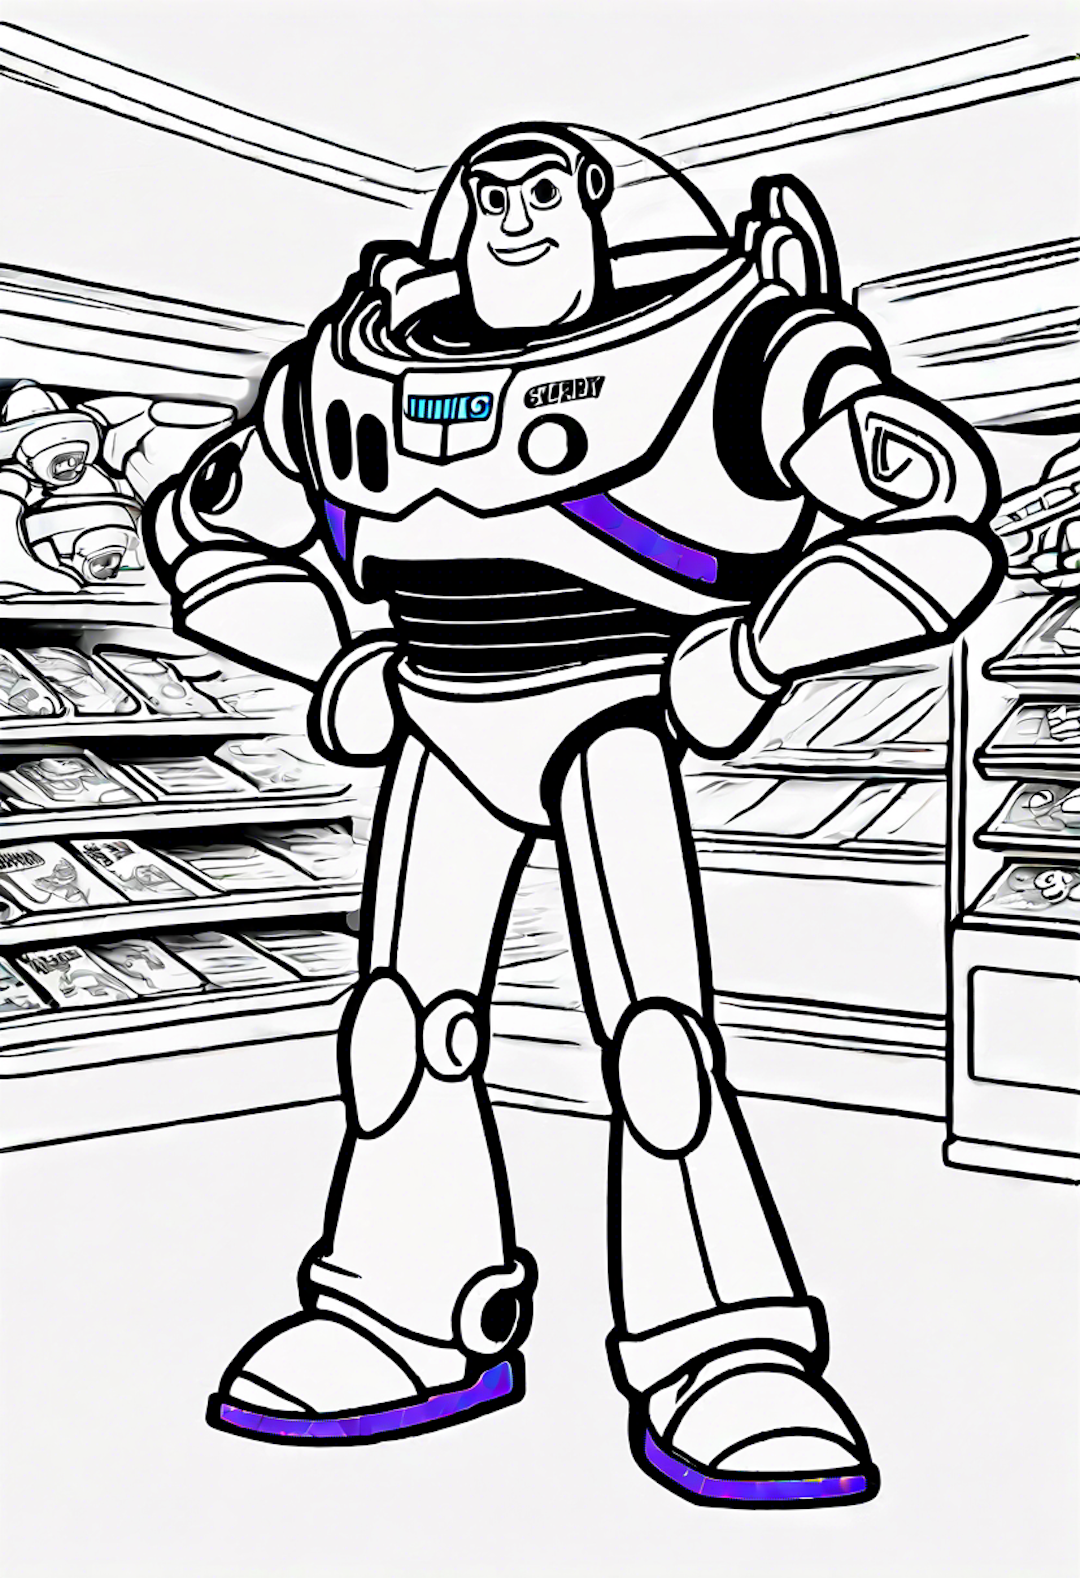 Buzz Lightyear In A Toy Store